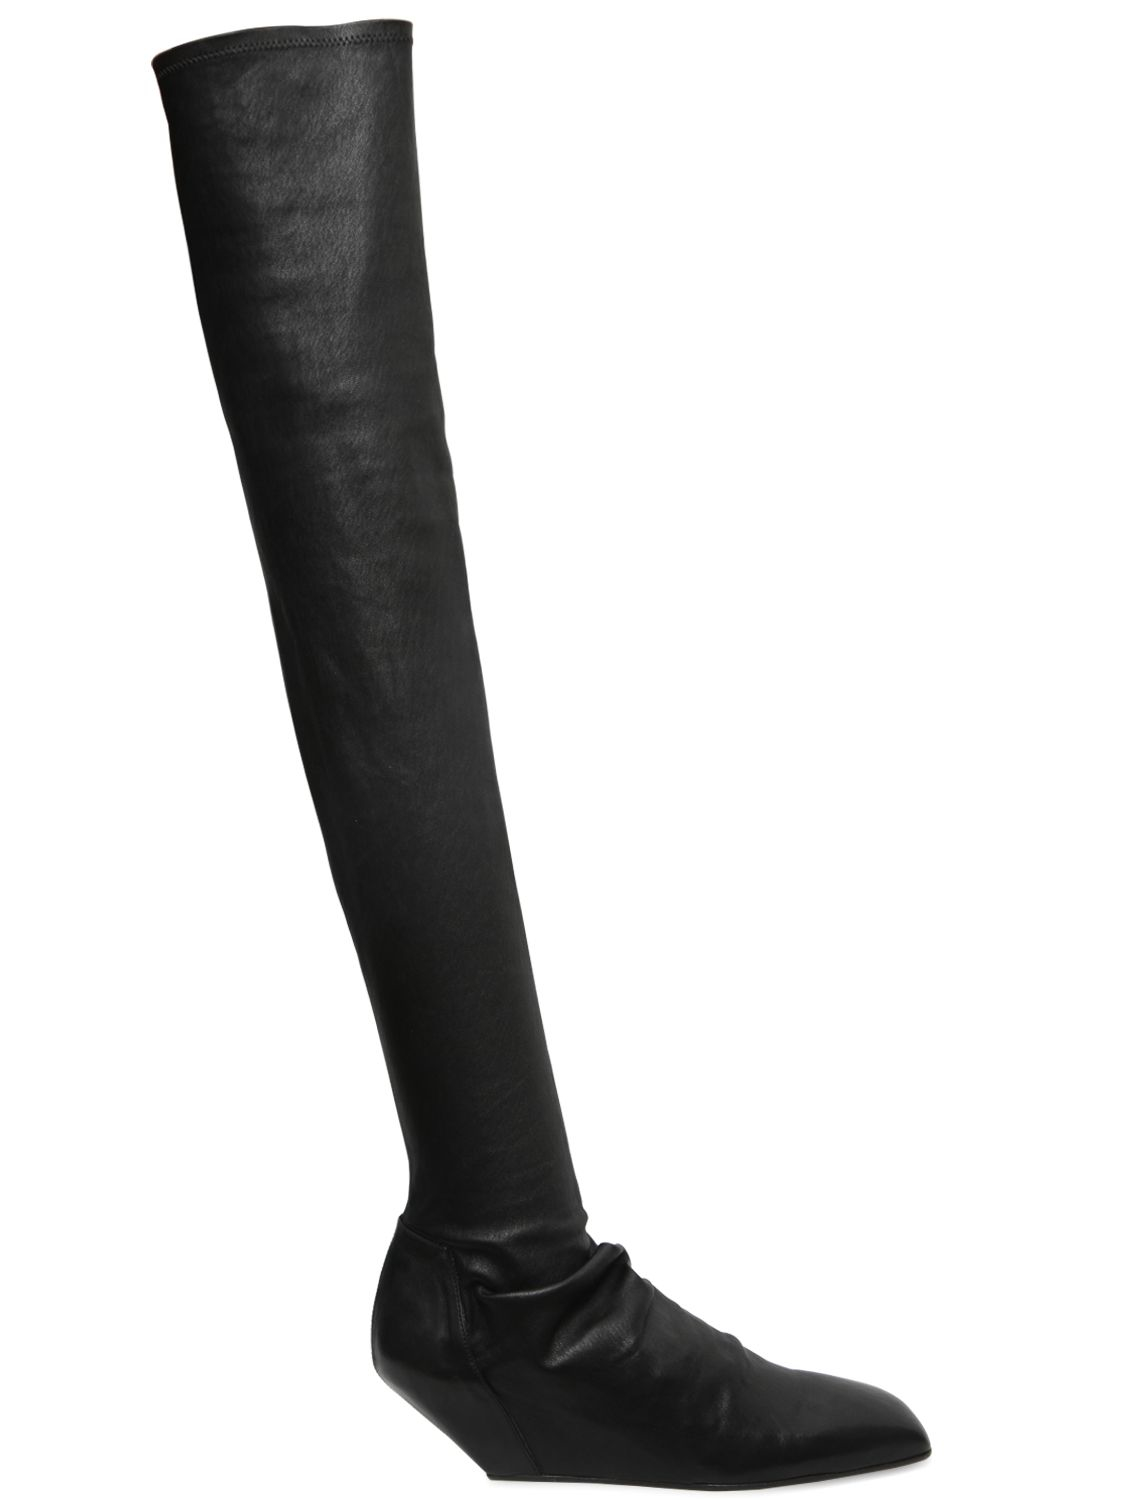 Rick Owens 70mm Stretch Leather Over The Knee Boots in Black - Lyst